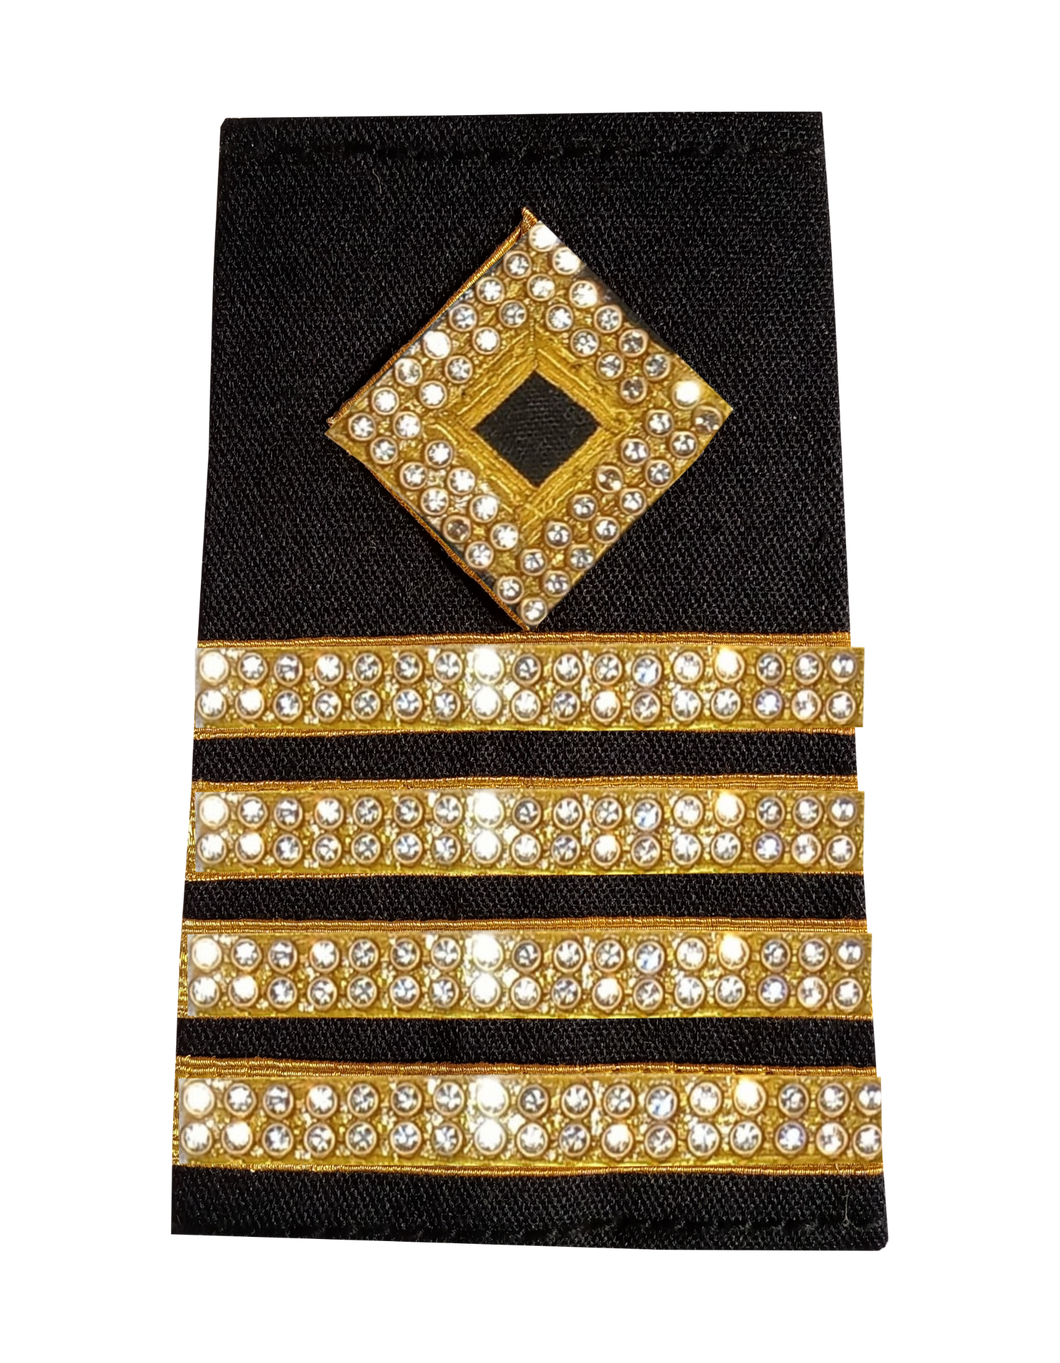 Unofficial Shefarers Decorative Epaulettes for Merchant Navy Officers / Mariner Engineers / ETO